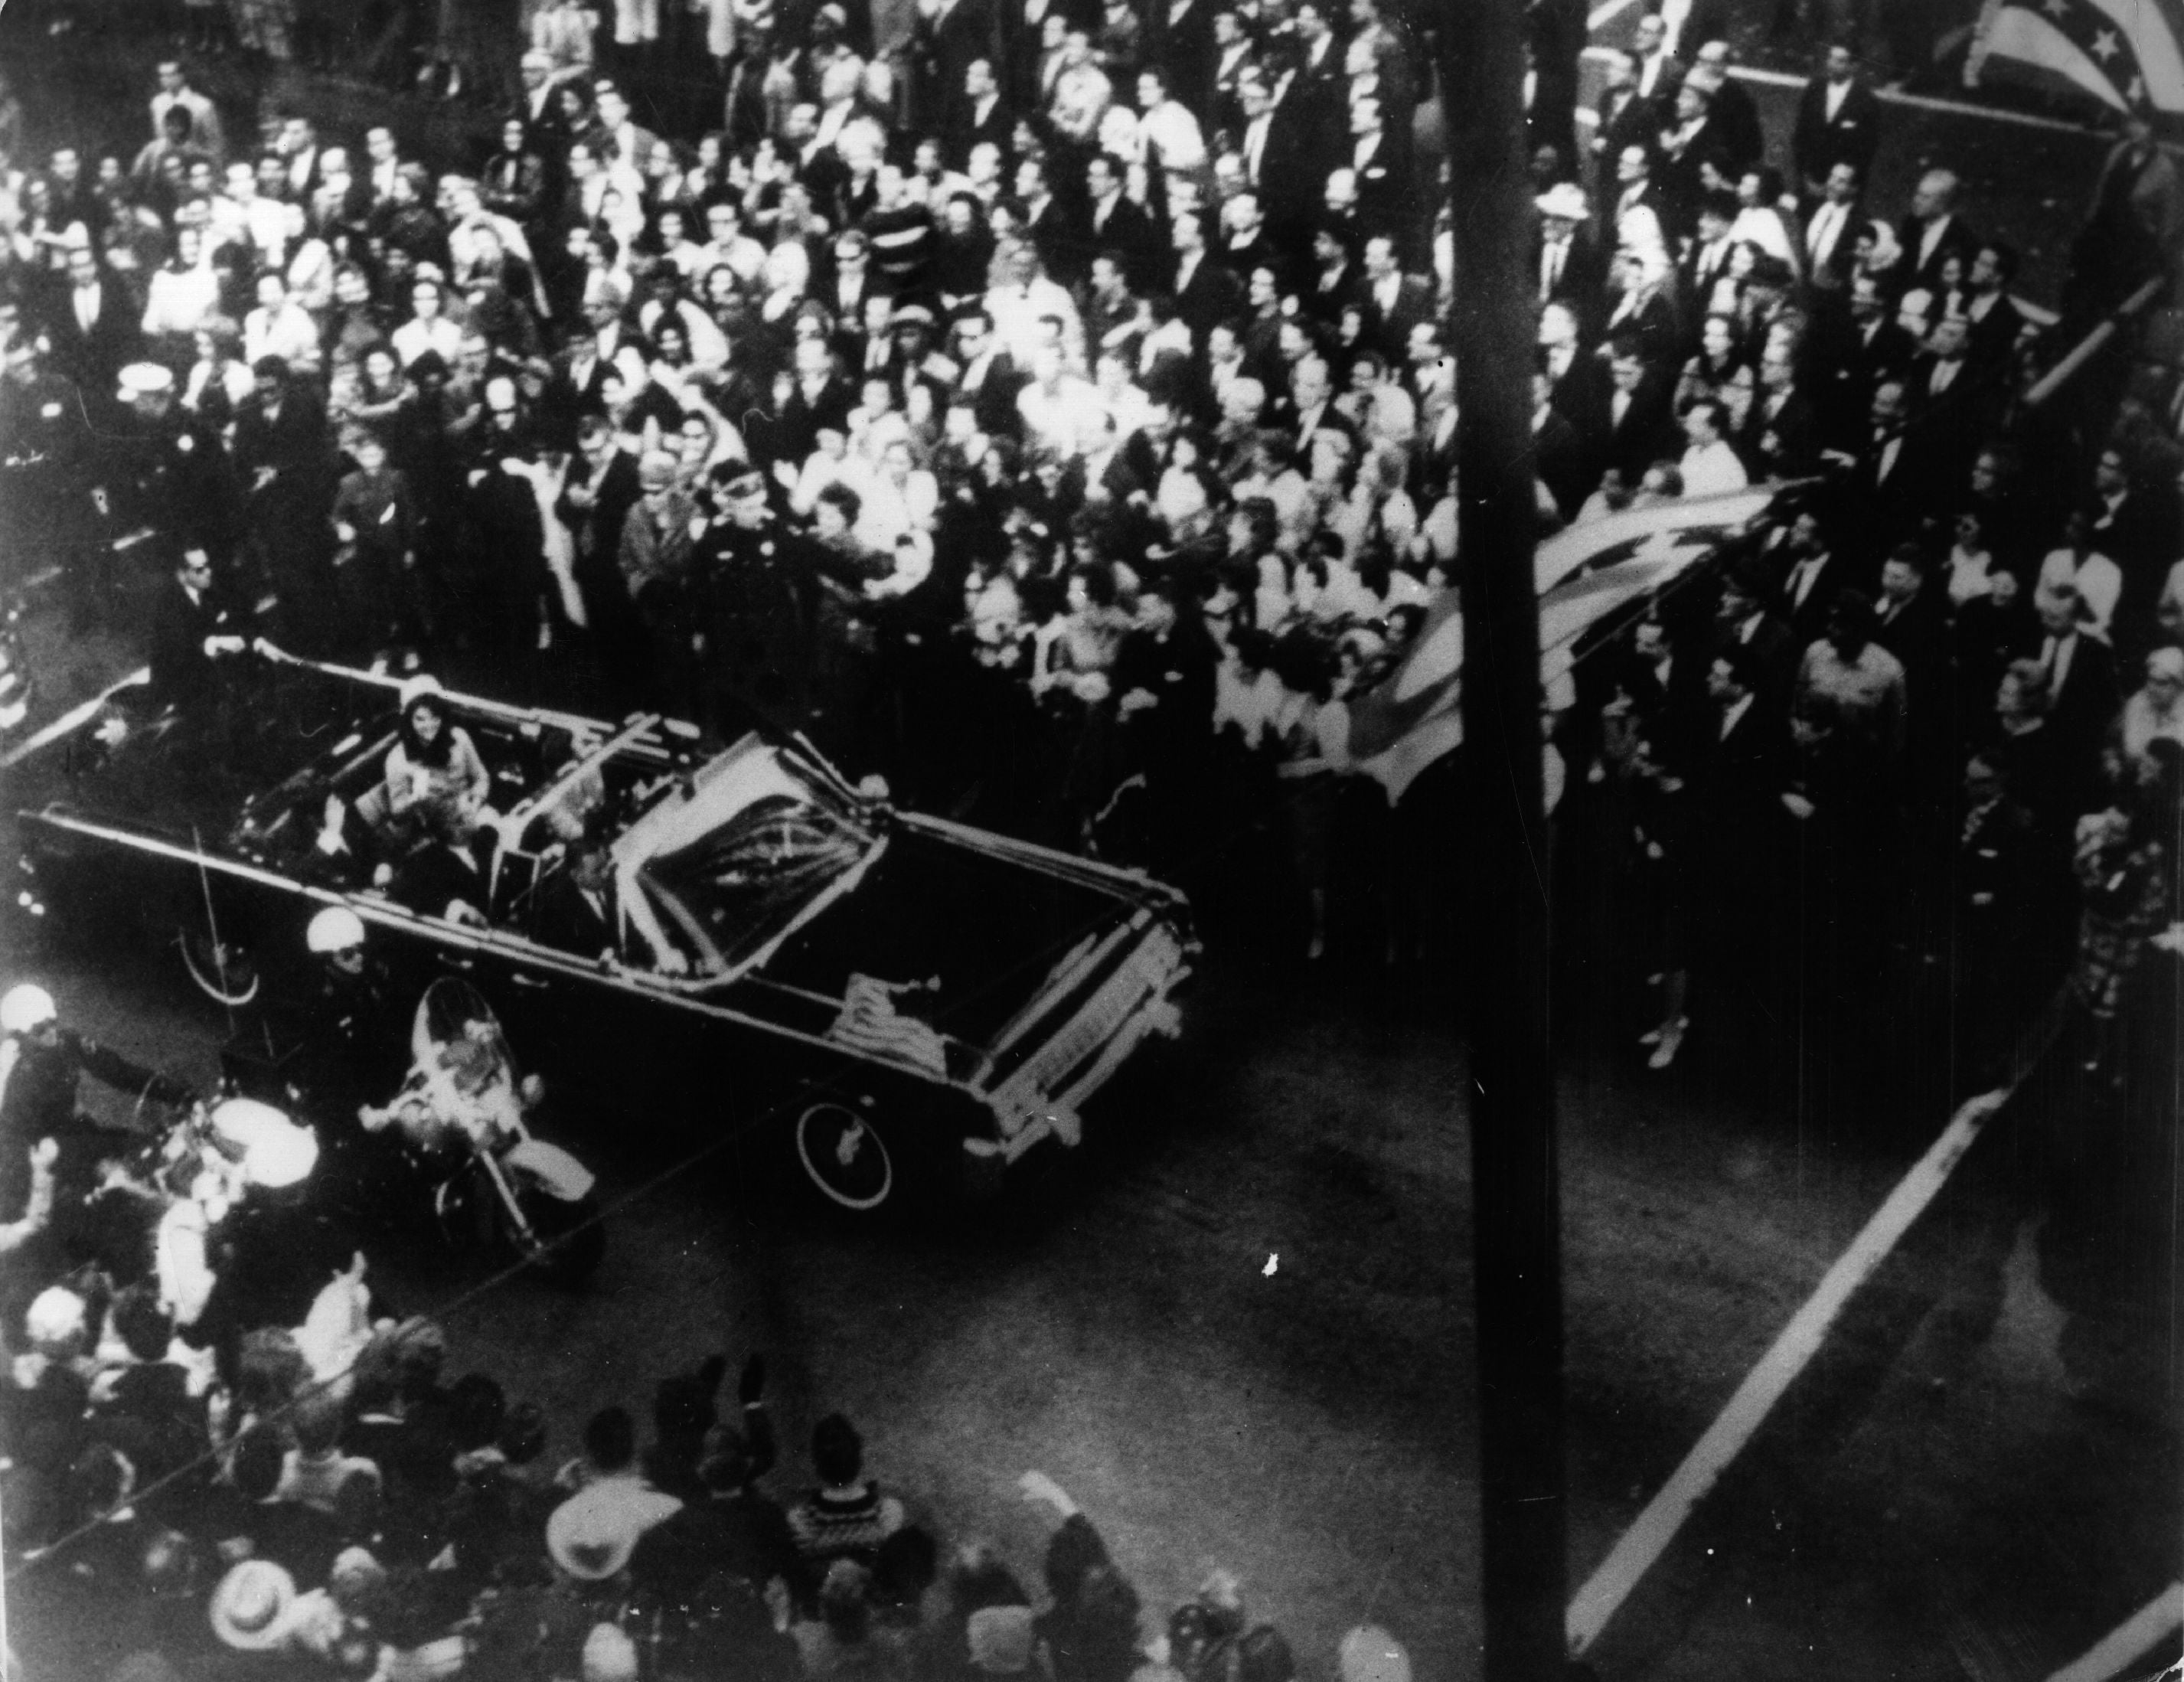 John F Kennedy, 35th president of the US, and first lady Jacqueline Kennedy traveling in the presidential motorcade in Dallas, shortly before his assassination